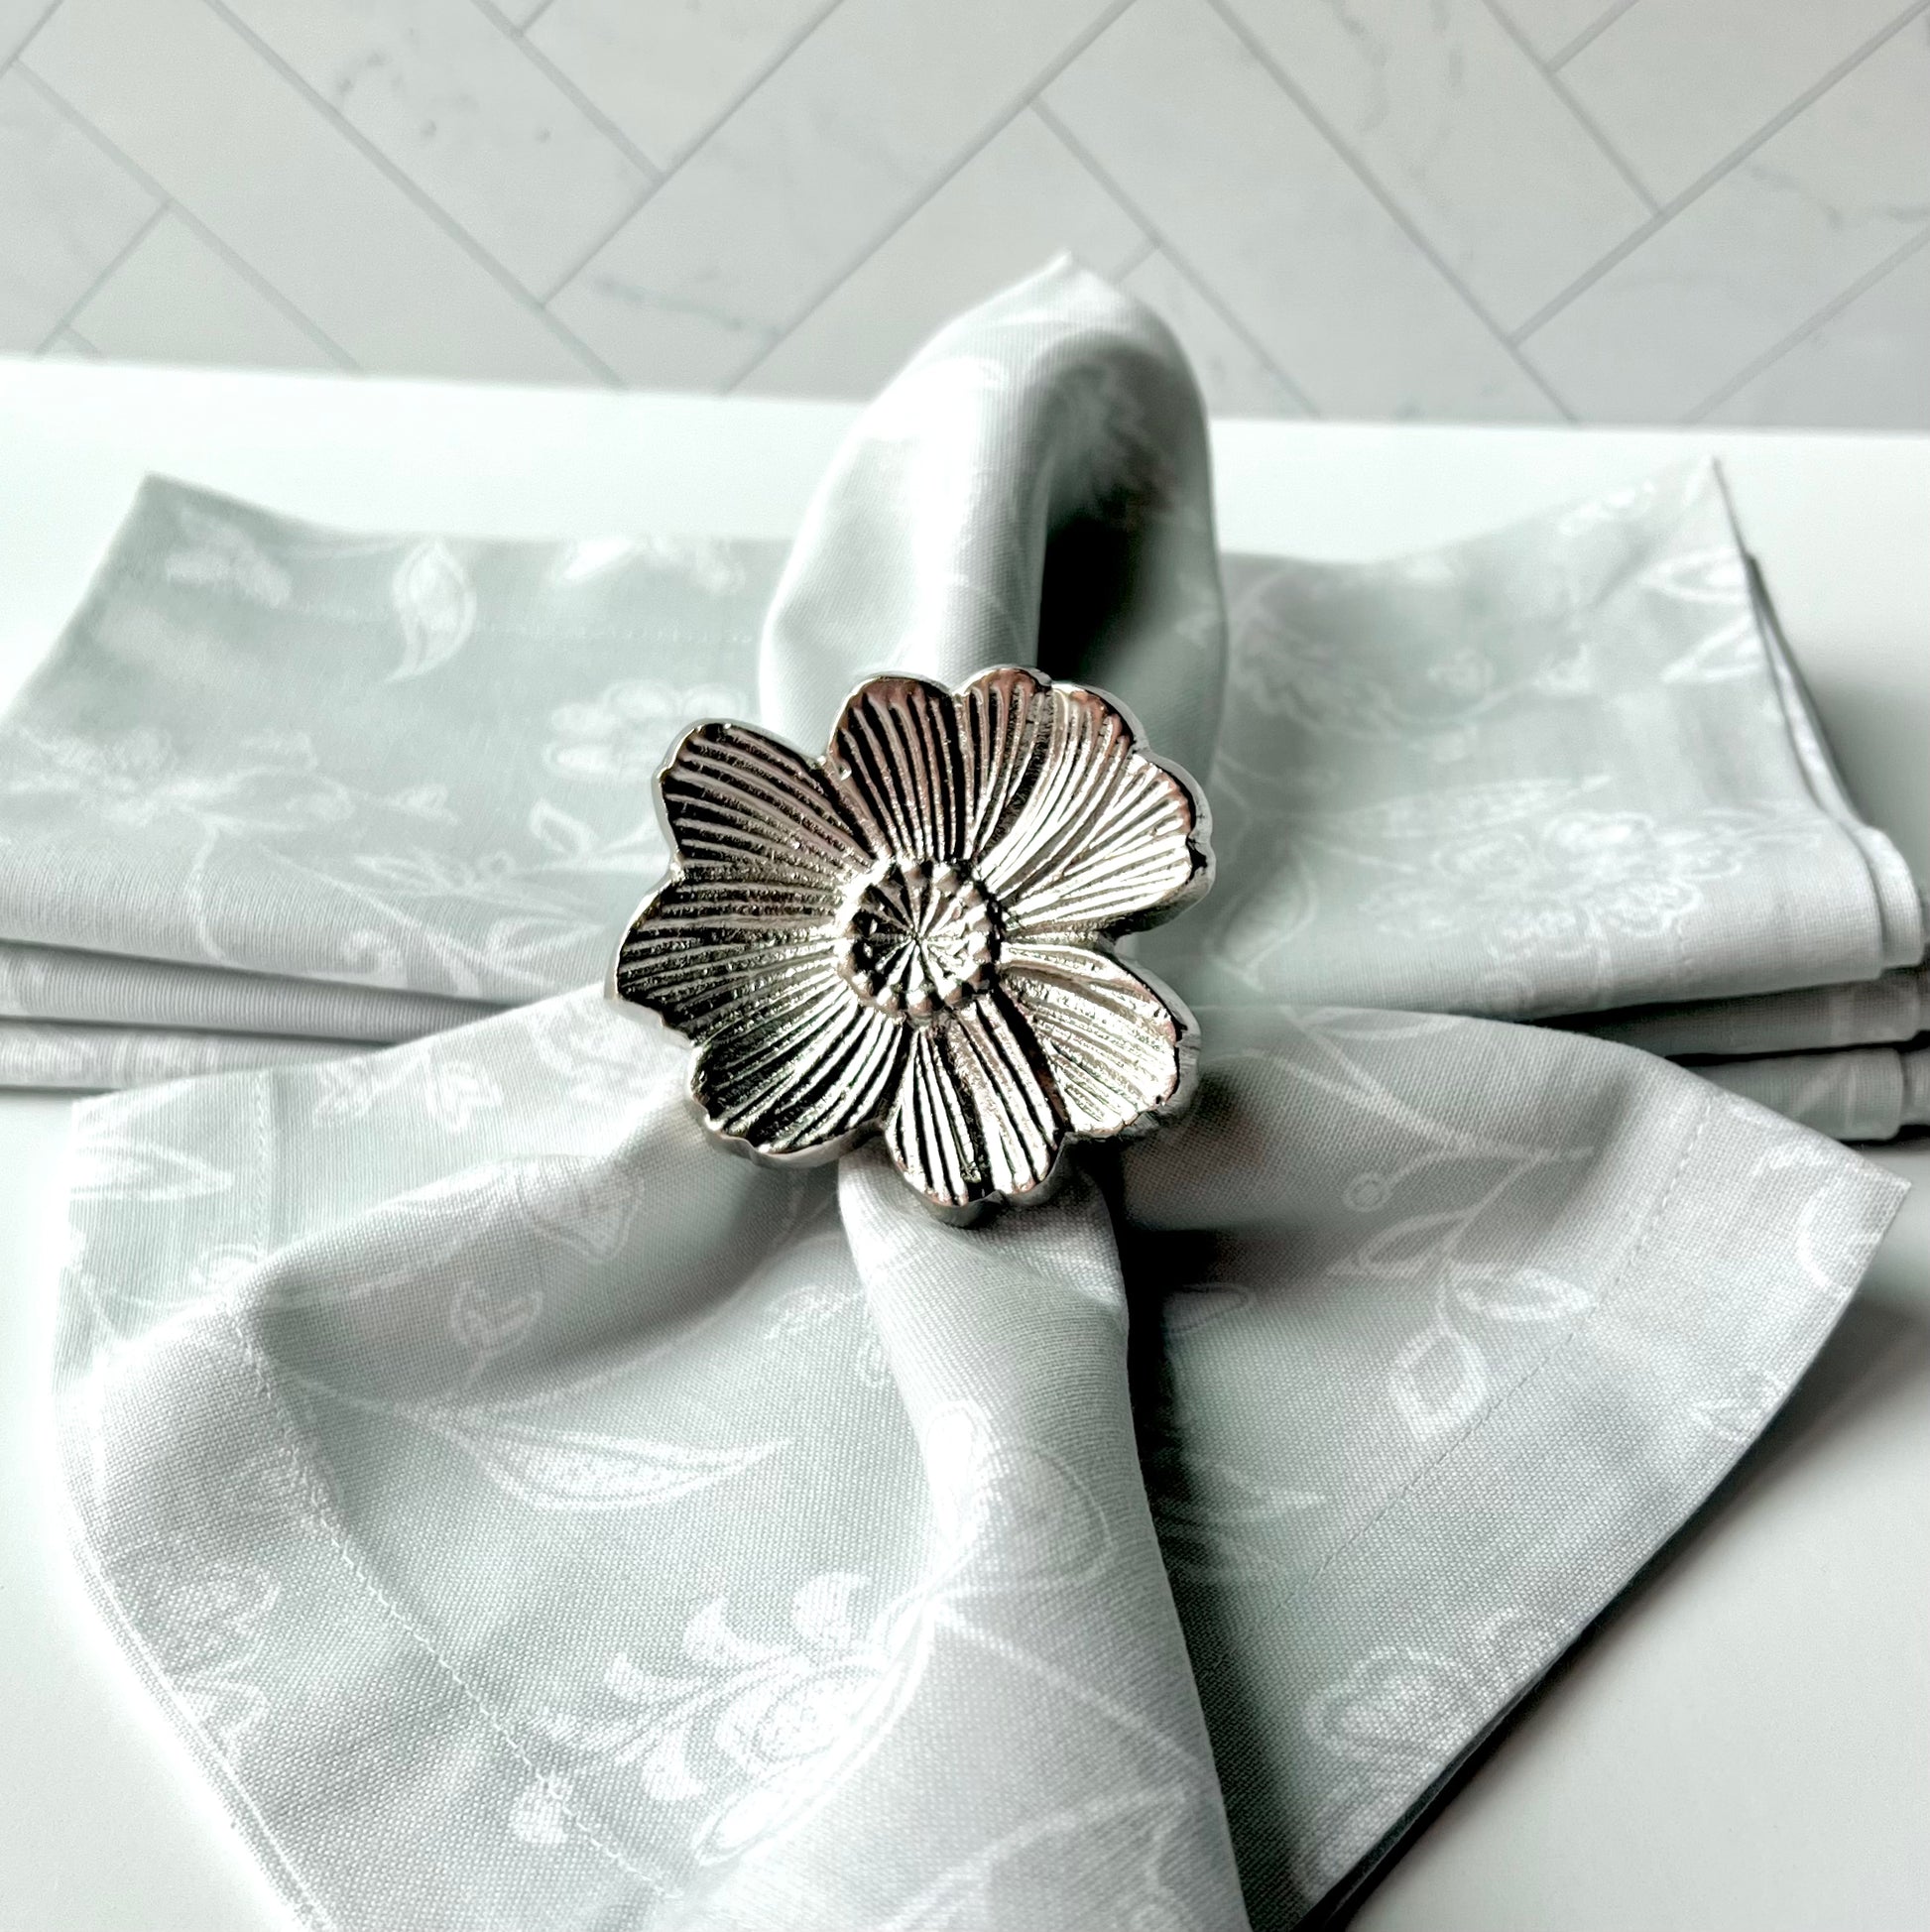 A silver flower napkin ring wrapped around a light gray napkin on a table